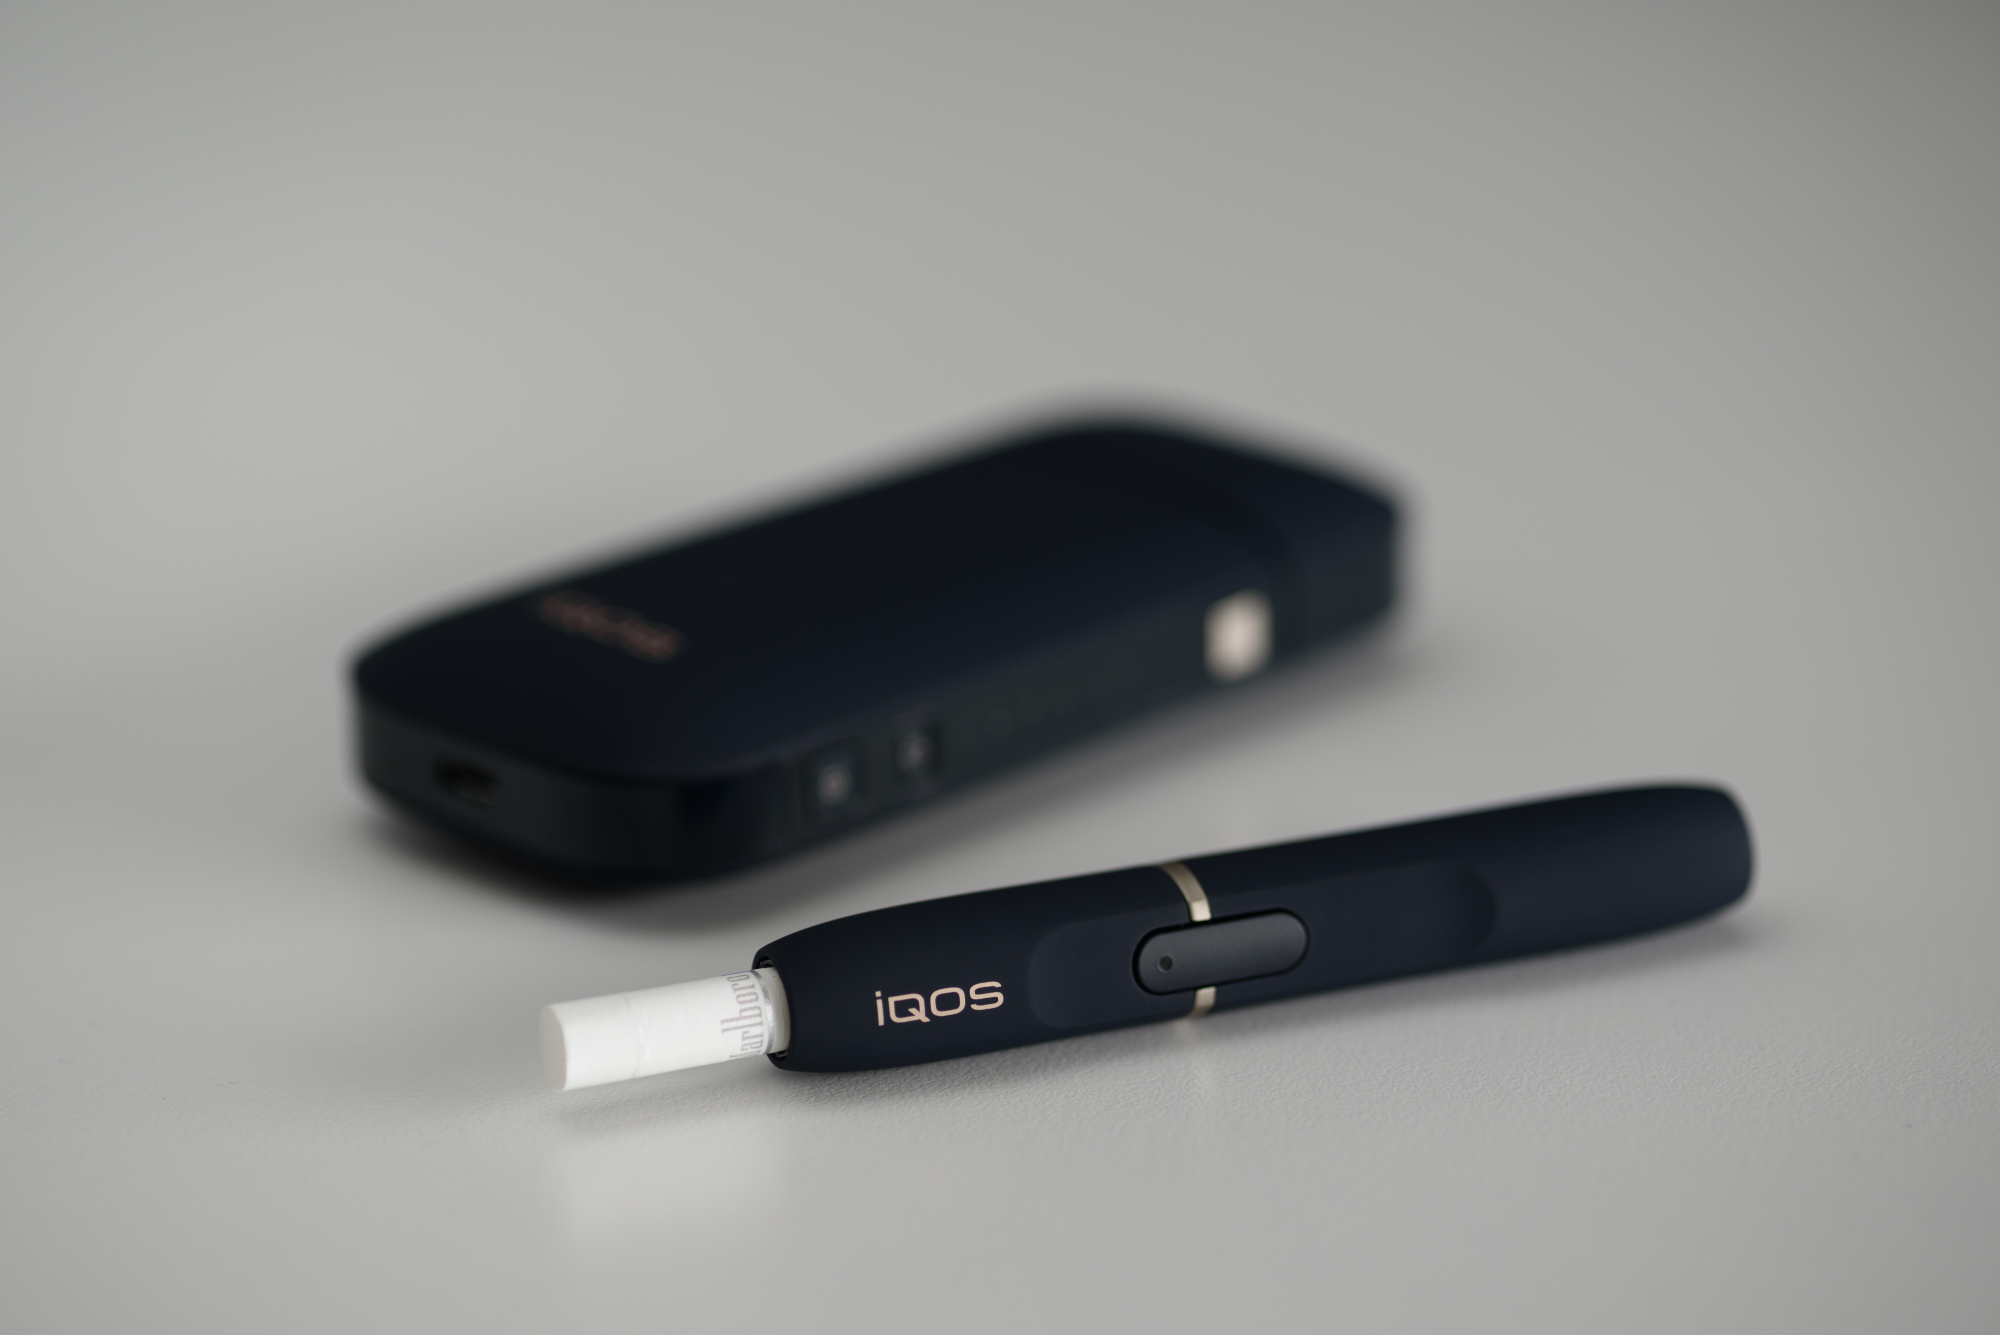 Philip Morris Allowed to Say IQOS Reduces Harmful Exposure - Bloomberg